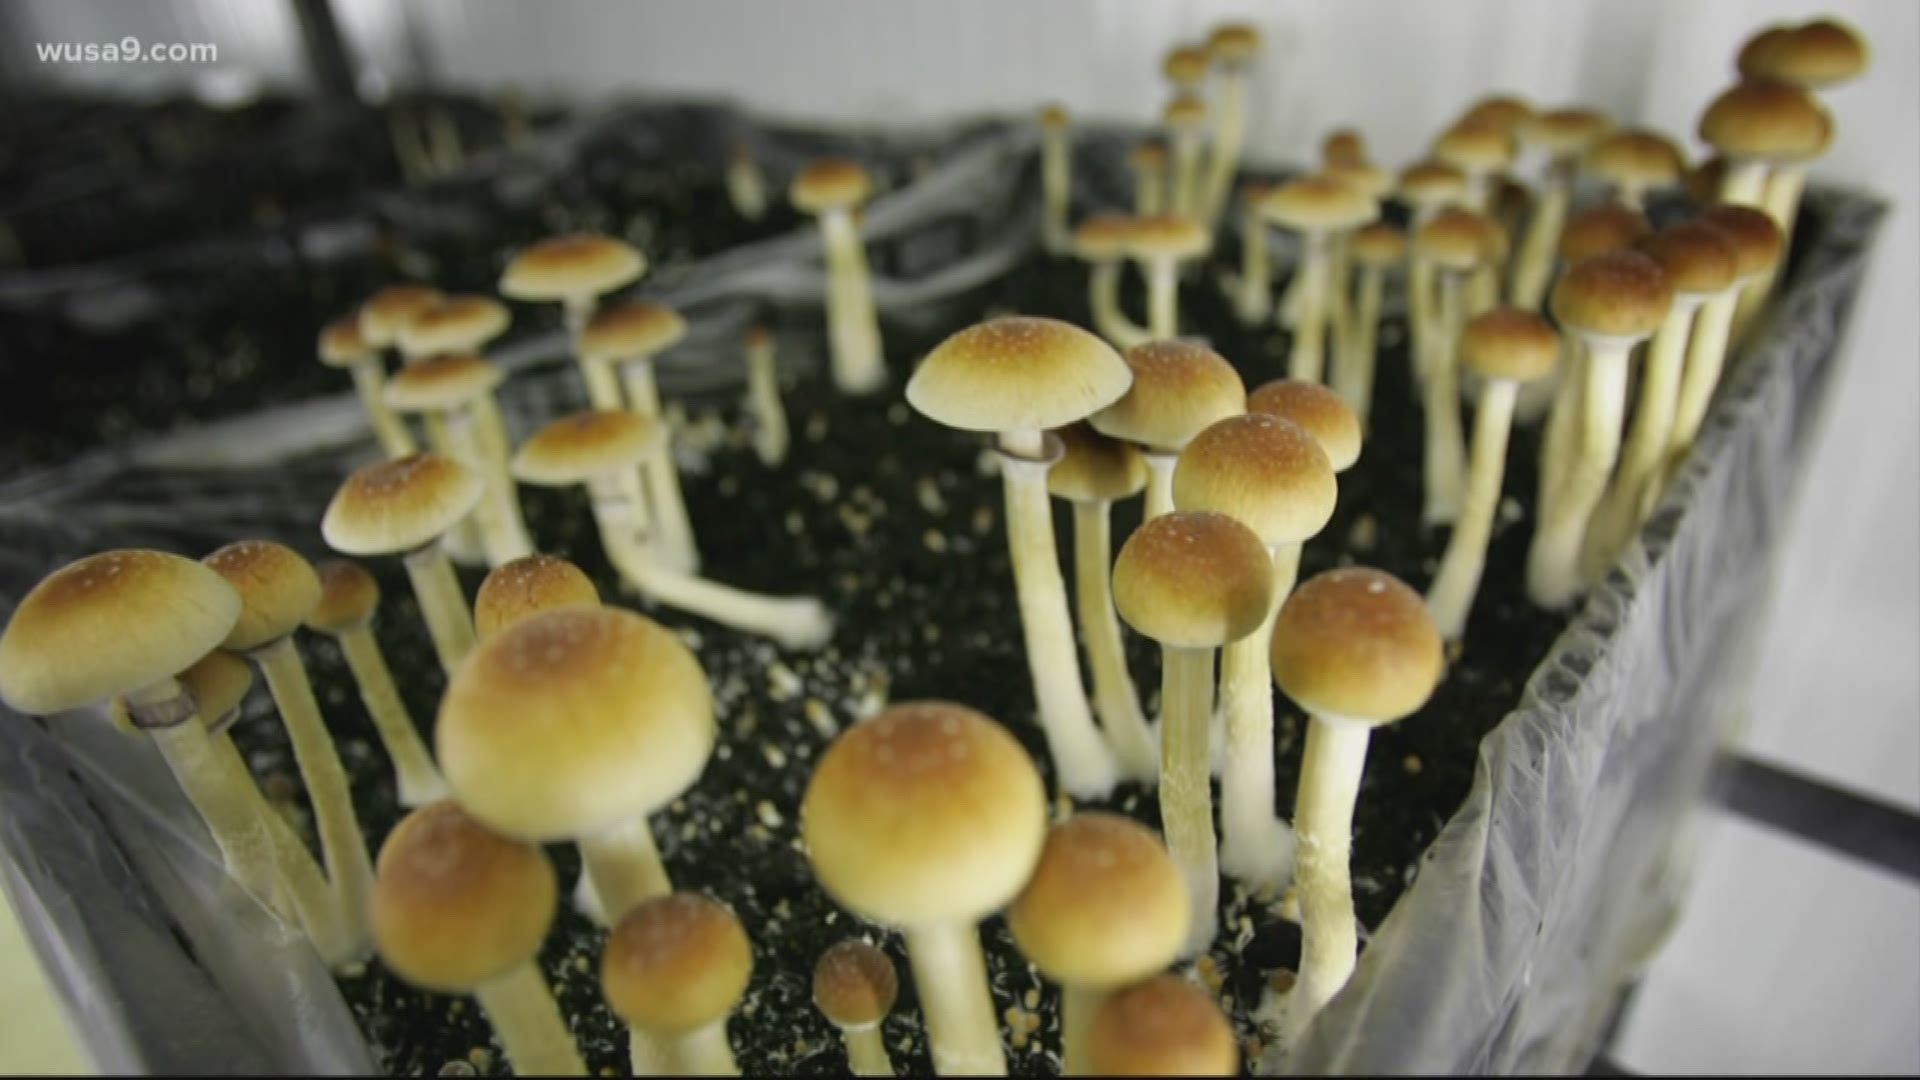 Intake of mushrooms: what you must know prior to